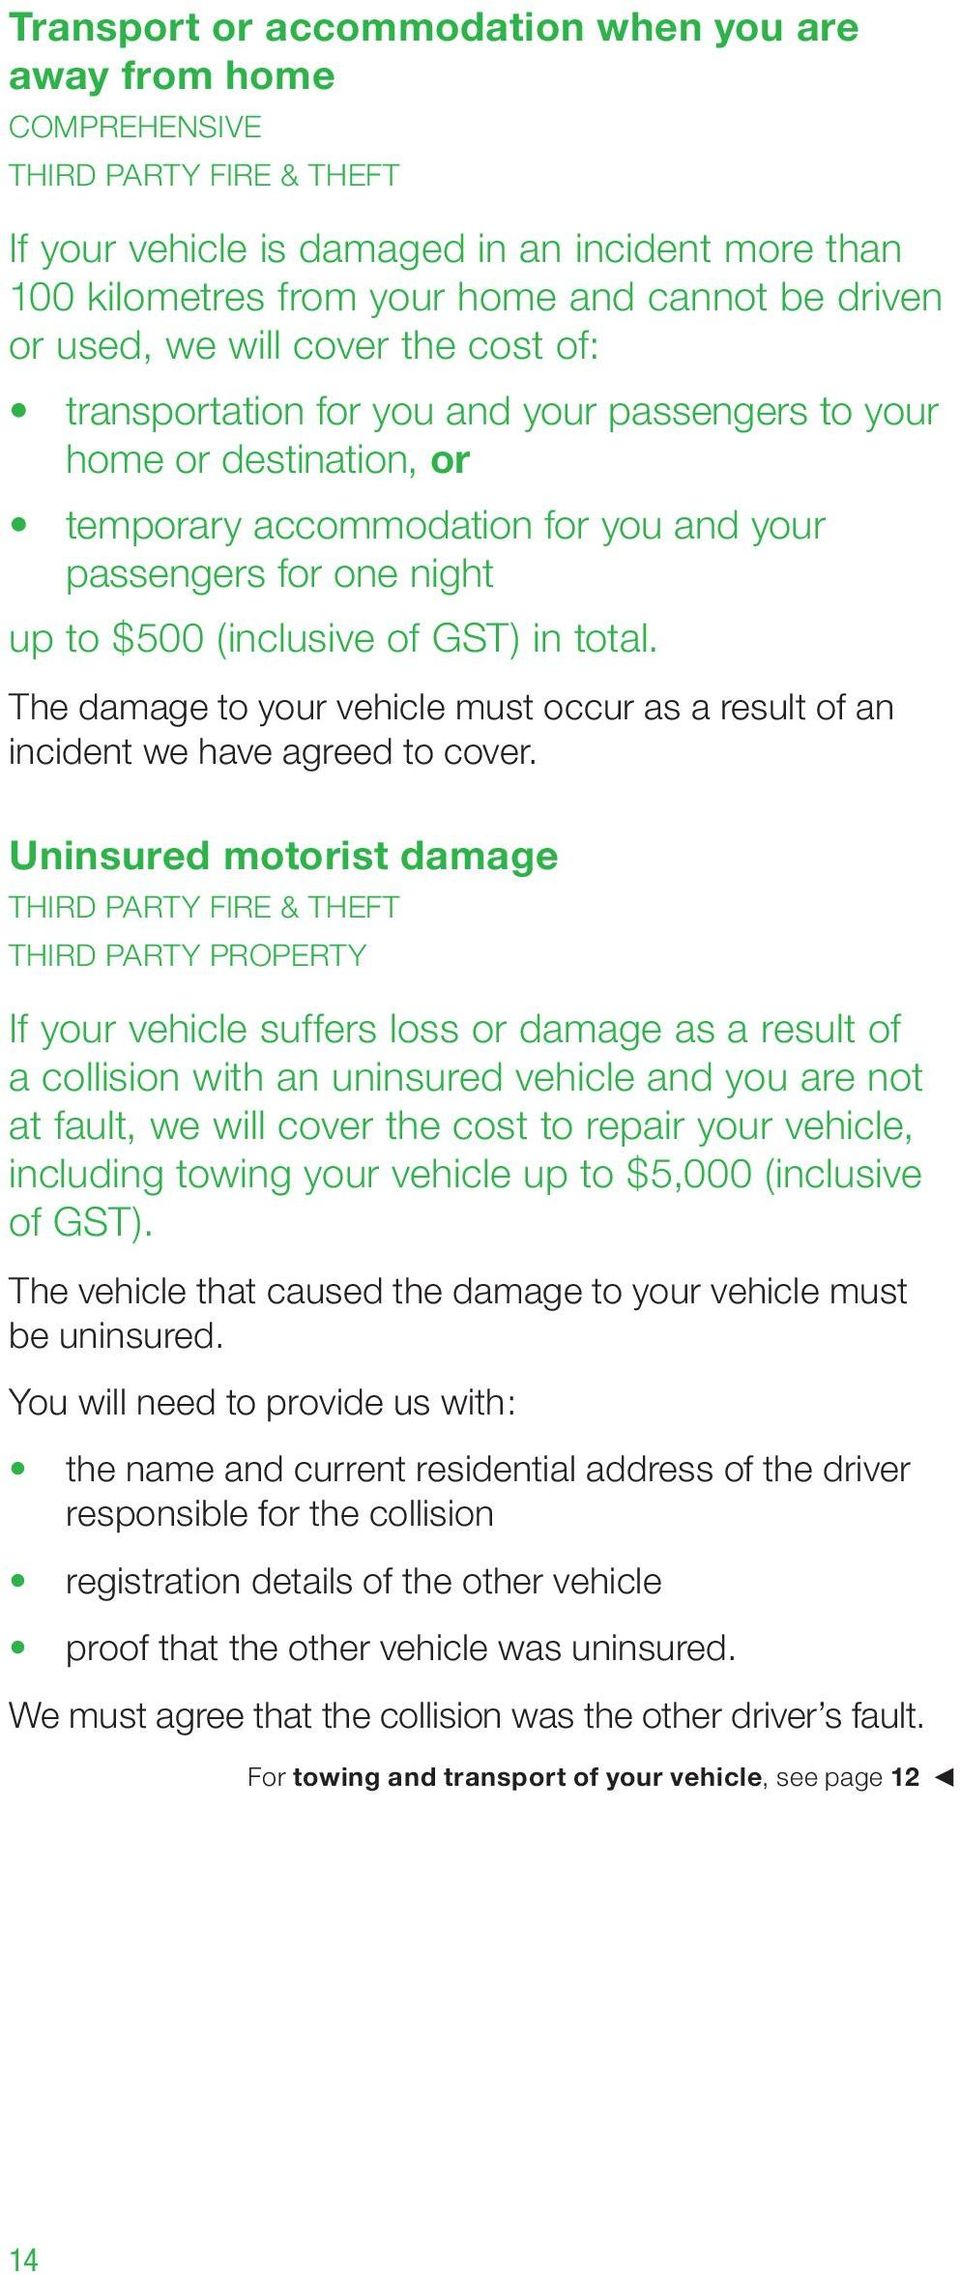 of GST) in total. The damage to your vehicle must occur as a result of an incident we have agreed to cover.